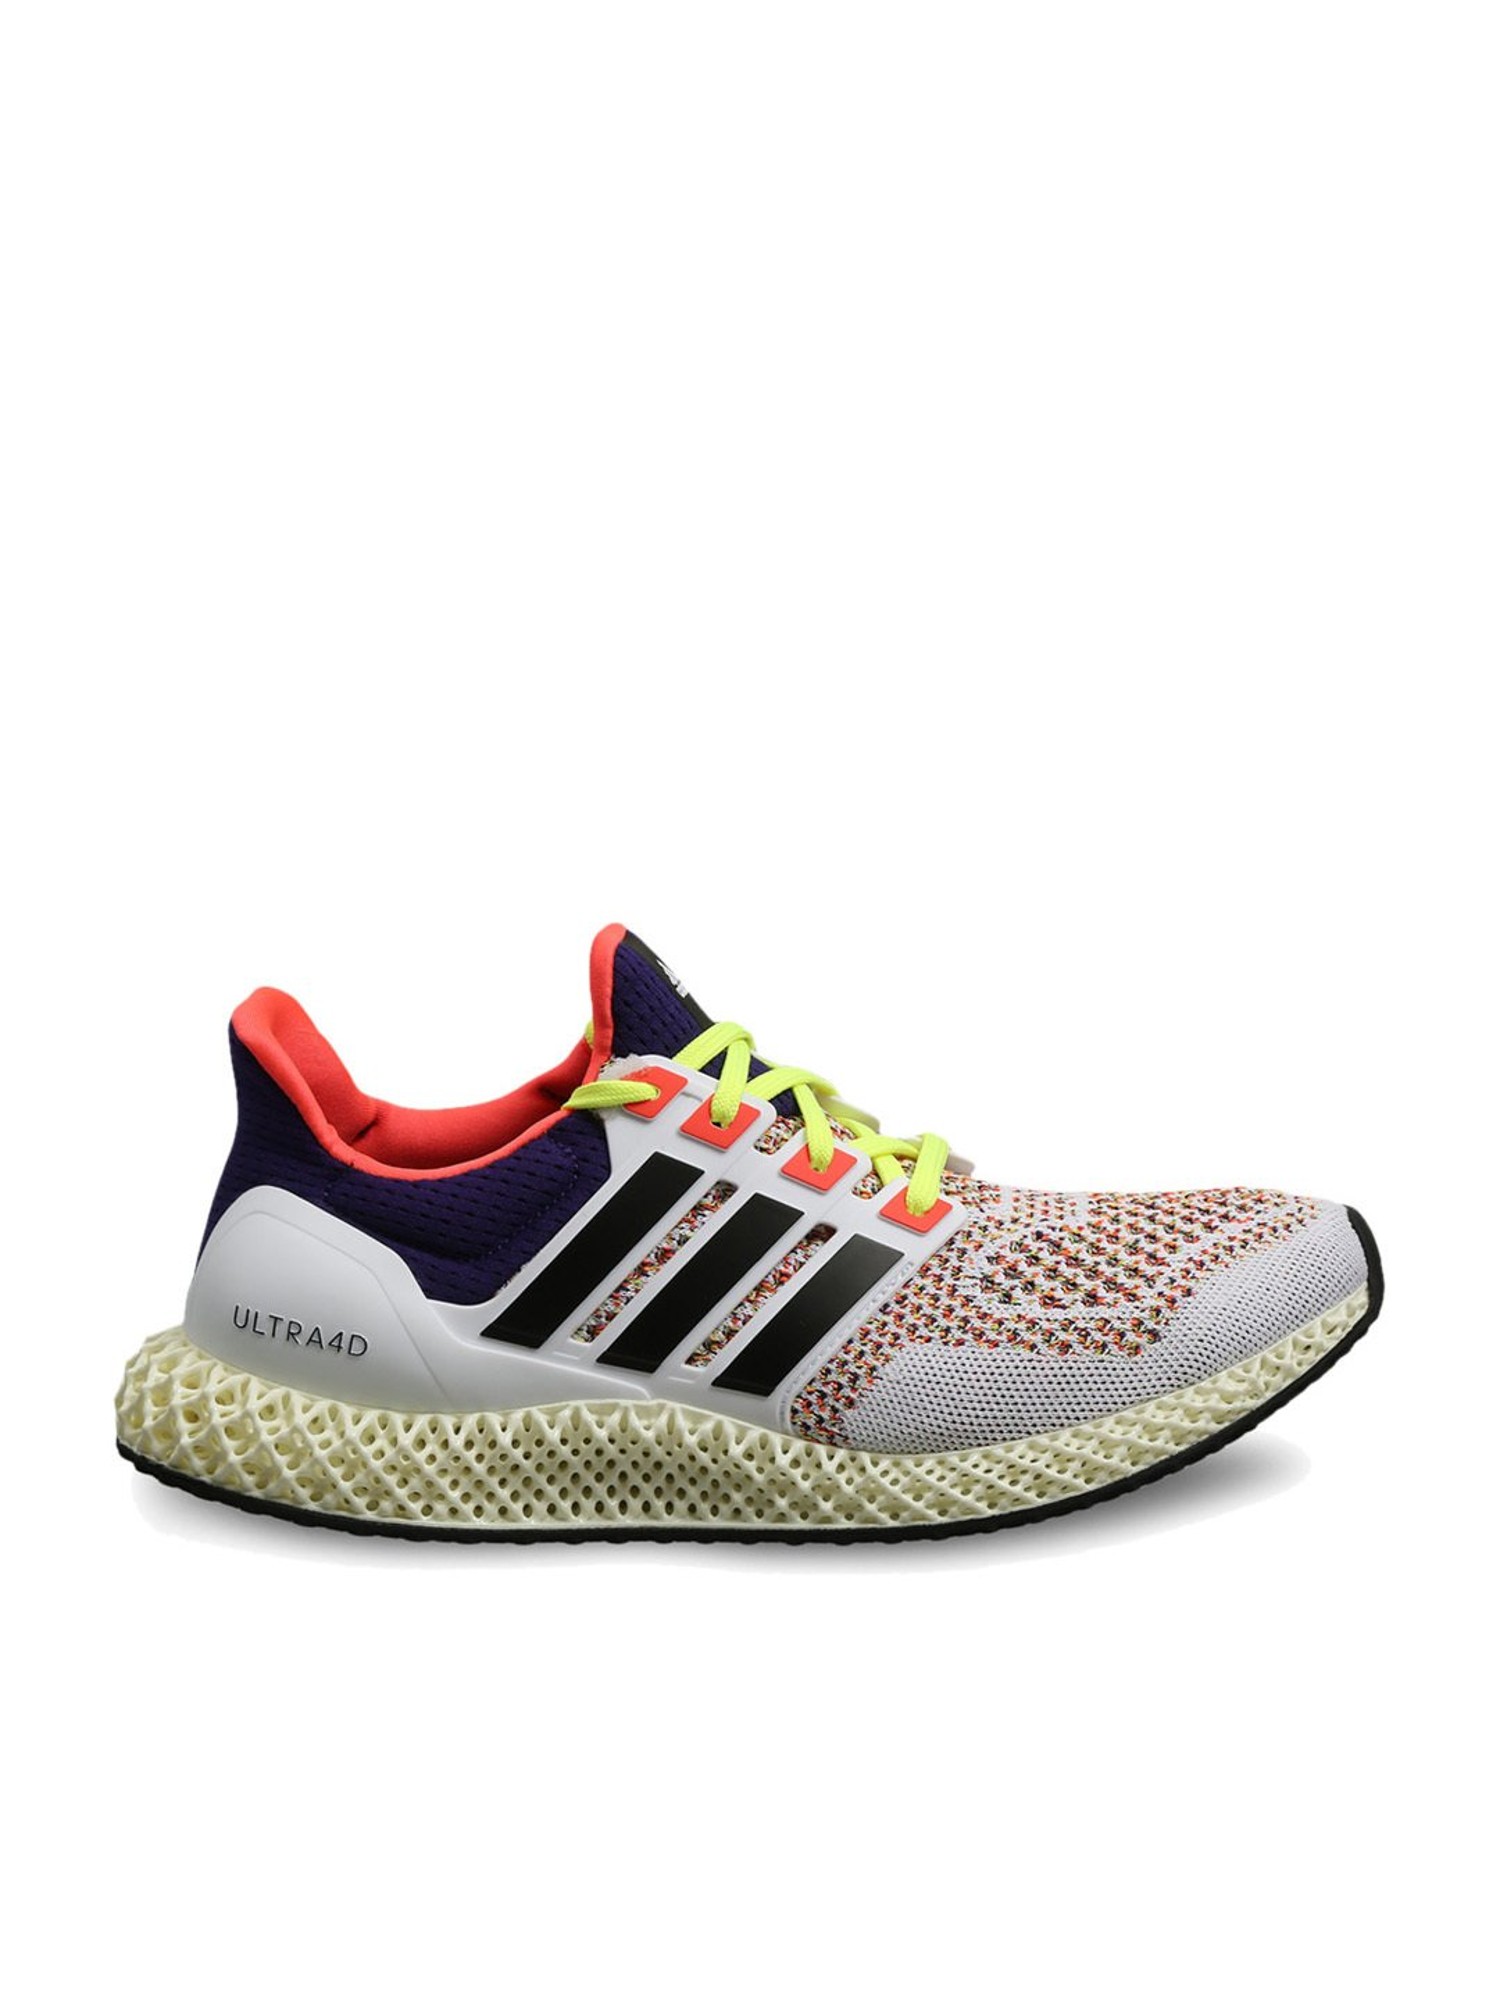 Adidas FX3789 Mens Running Response SR Shoes Multicolor in Coimbatore at  best price by Reliance Footprint Ltd  Justdial